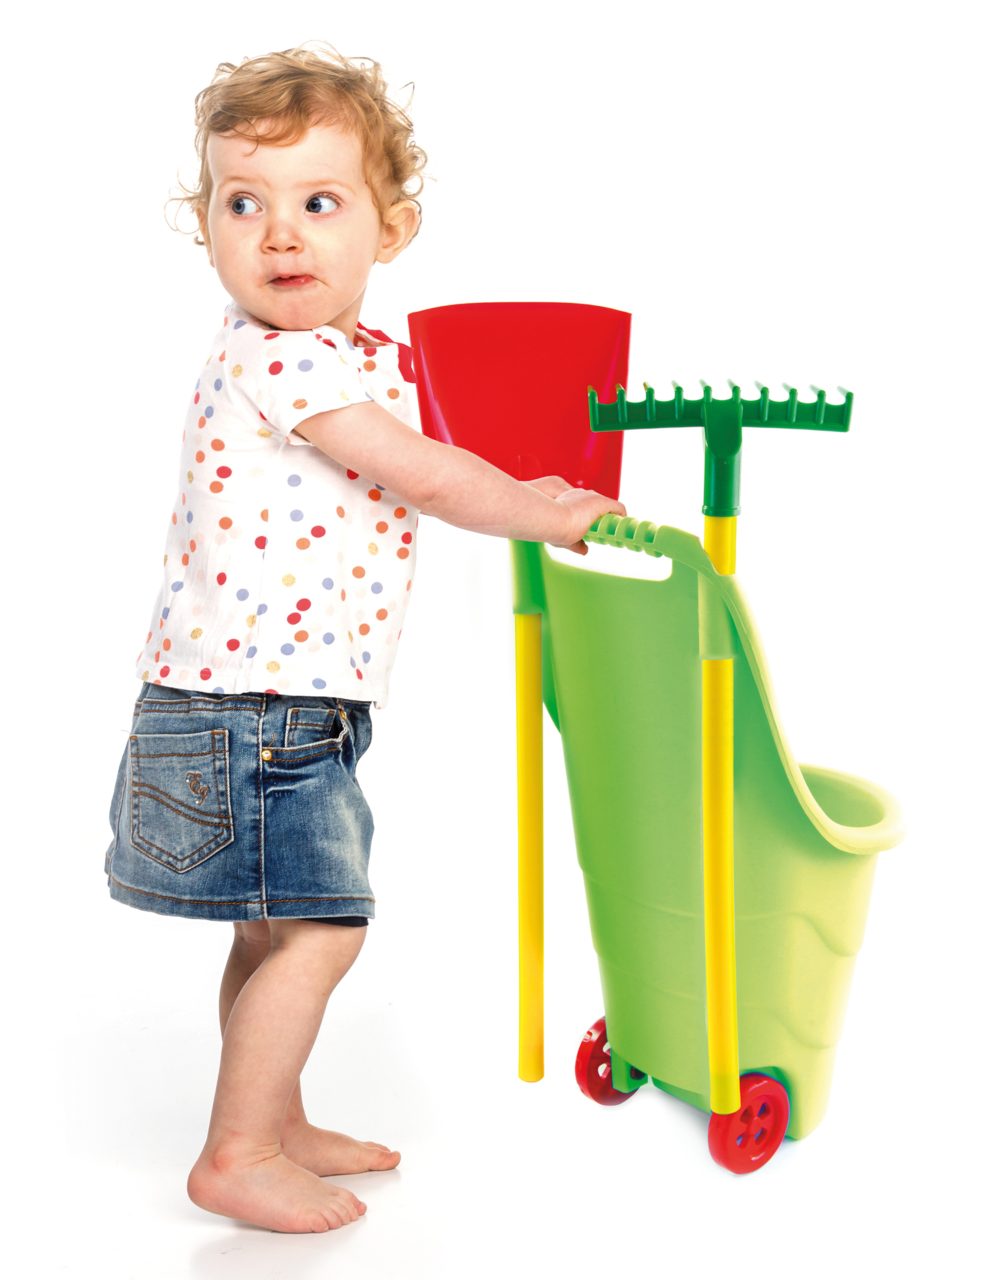 Toy Garden Trolley with Toy Garden Tools 1